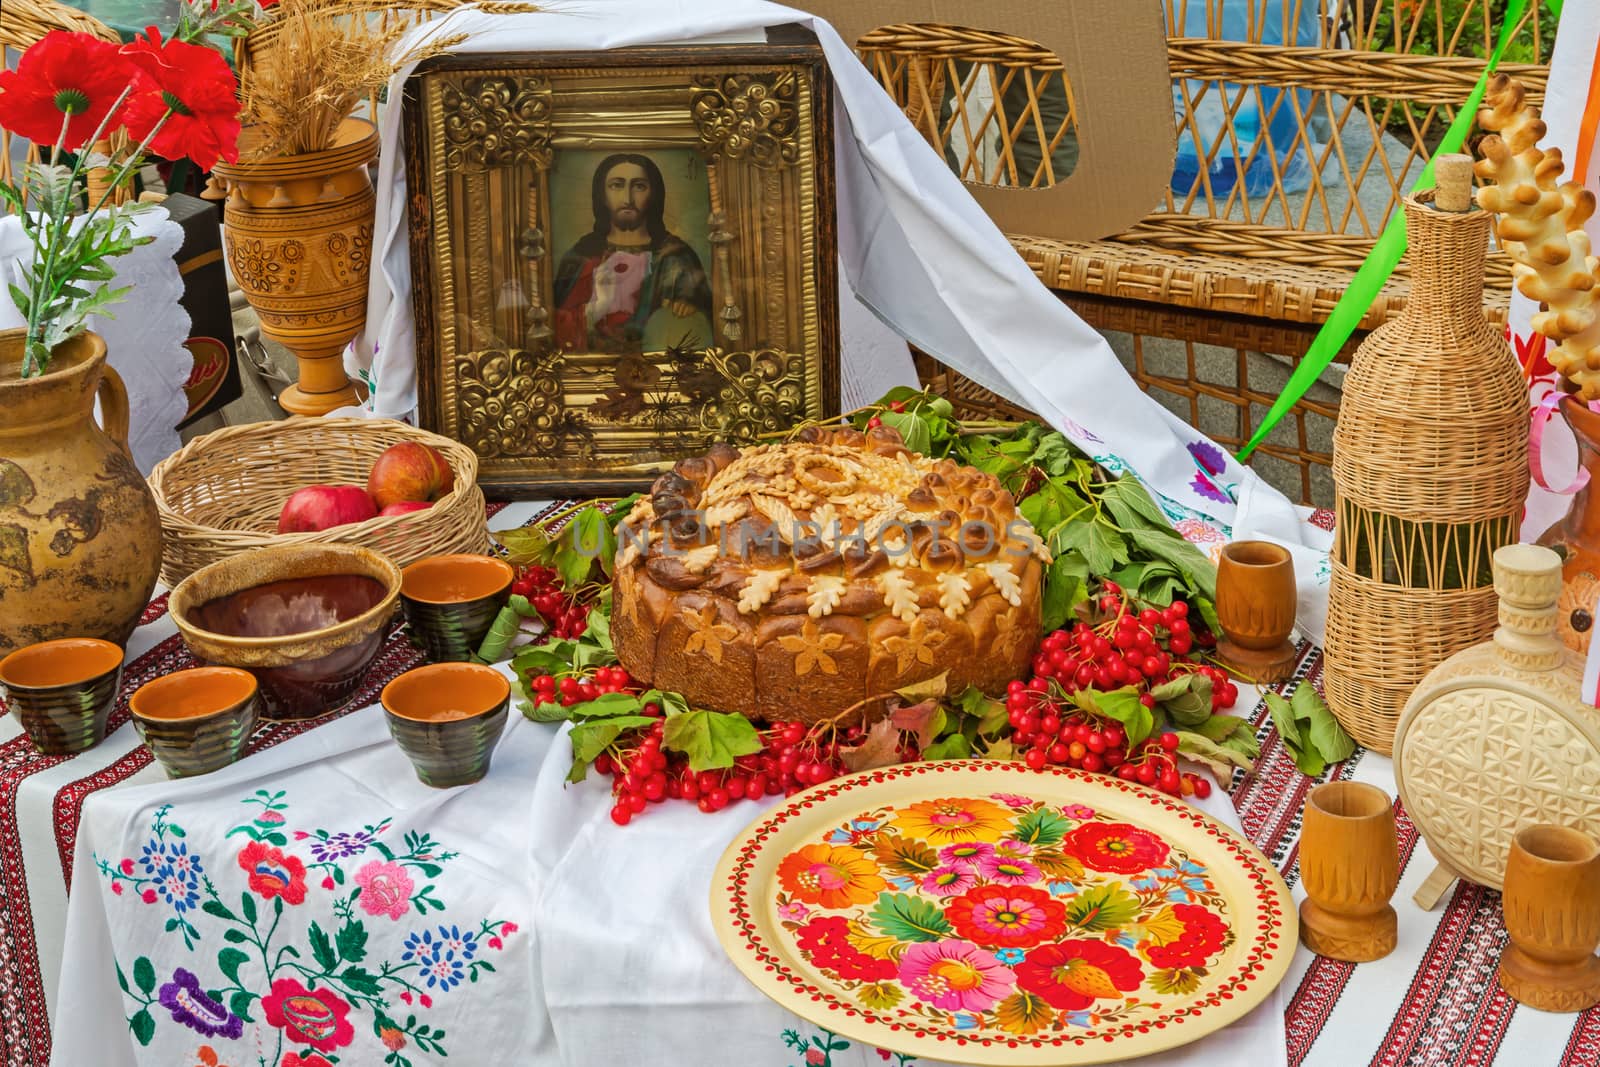 European people's table setting in national Slavic style